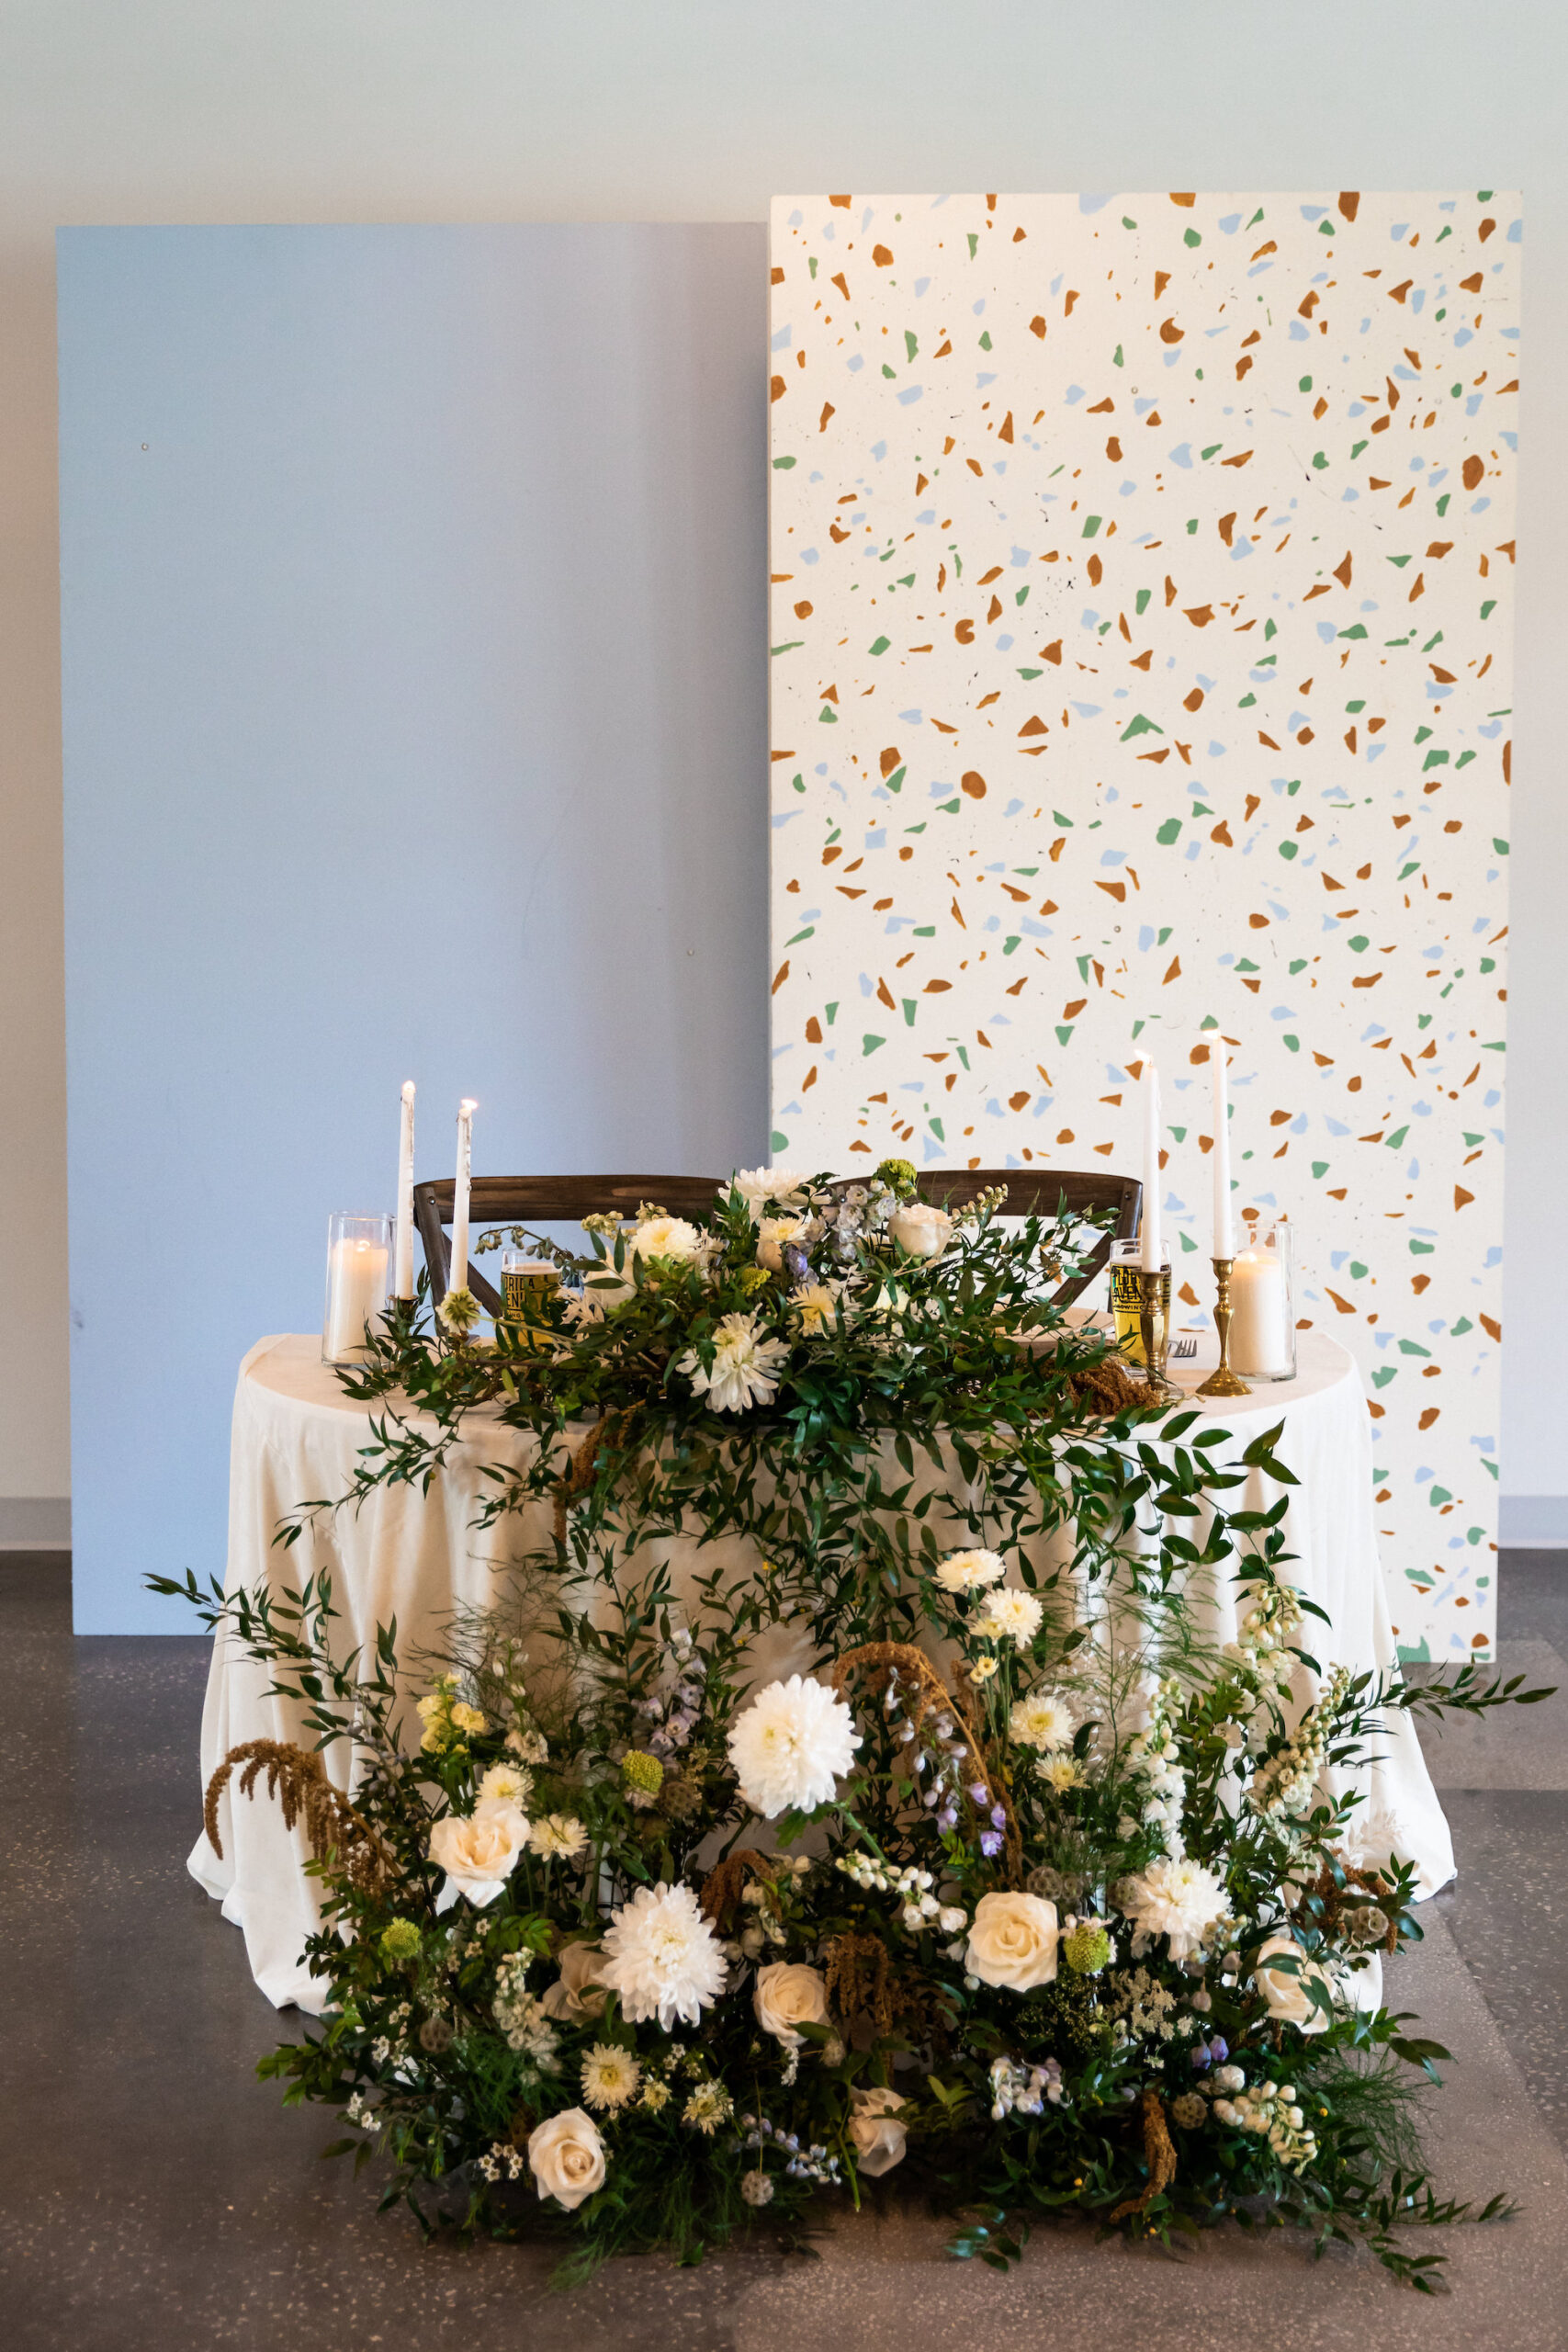 Modern Whimsical Wedding Reception Decor, Sweetheart Table with Lush Greenery and White Flowers Arrangement, Light Blue and Terrazzo Panel Backdrops